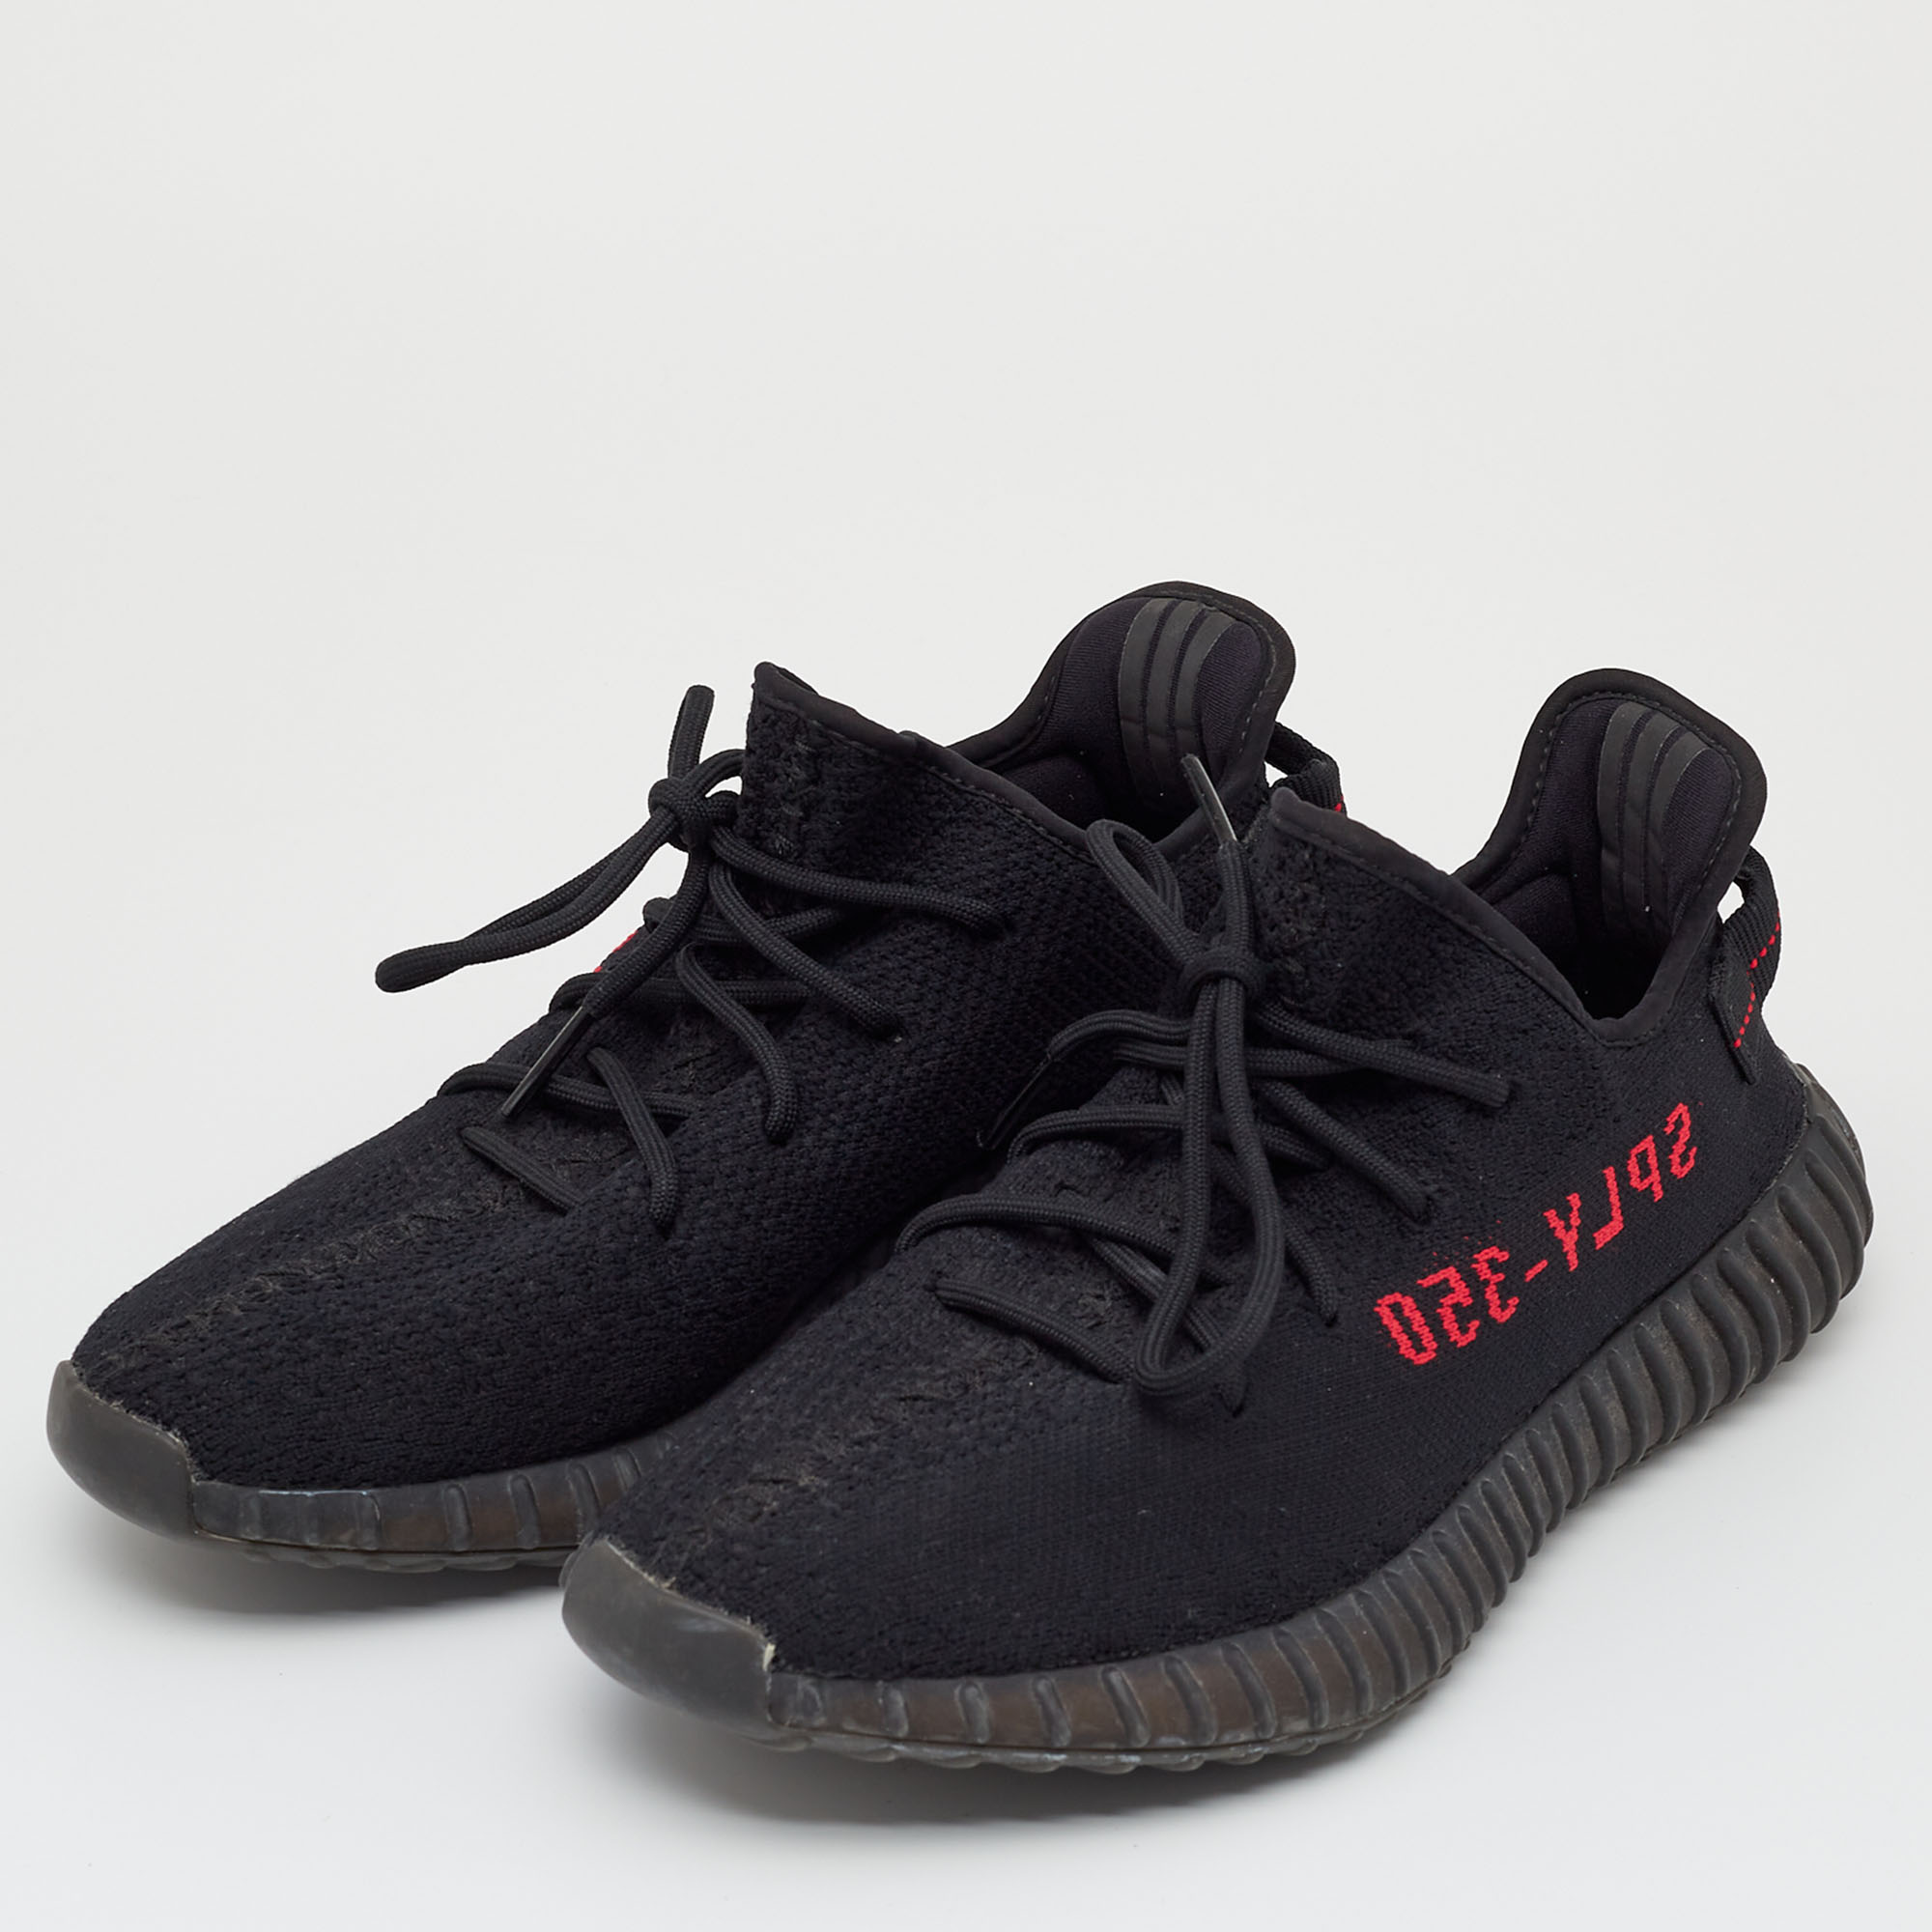 

Yeezy x Adidas Black Knit Fabric Boost 350 V2 Cinder Sneakers Size 44 2/3